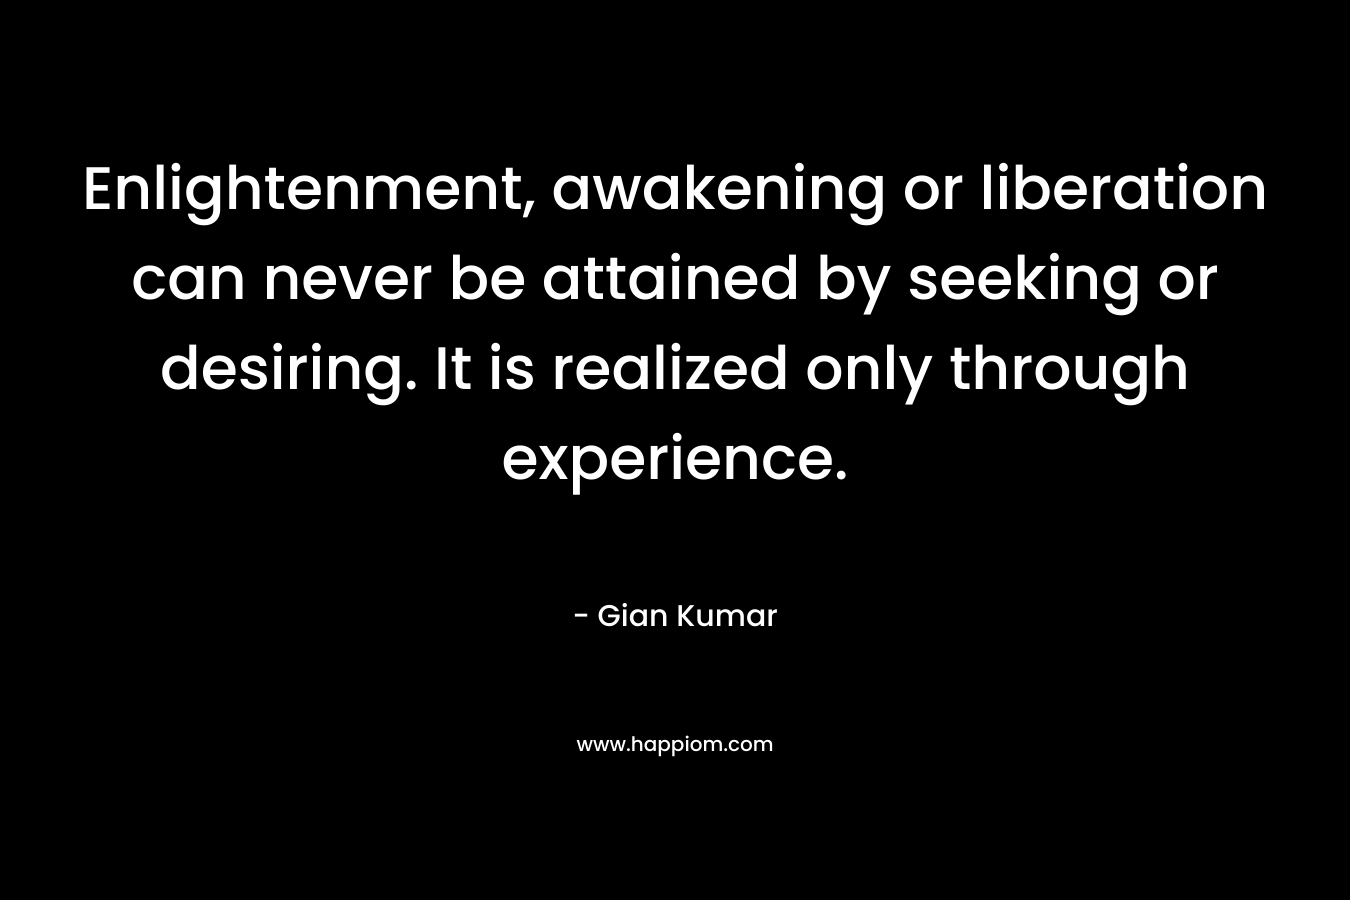 Enlightenment, awakening or liberation can never be attained by seeking or desiring. It is realized only through experience.